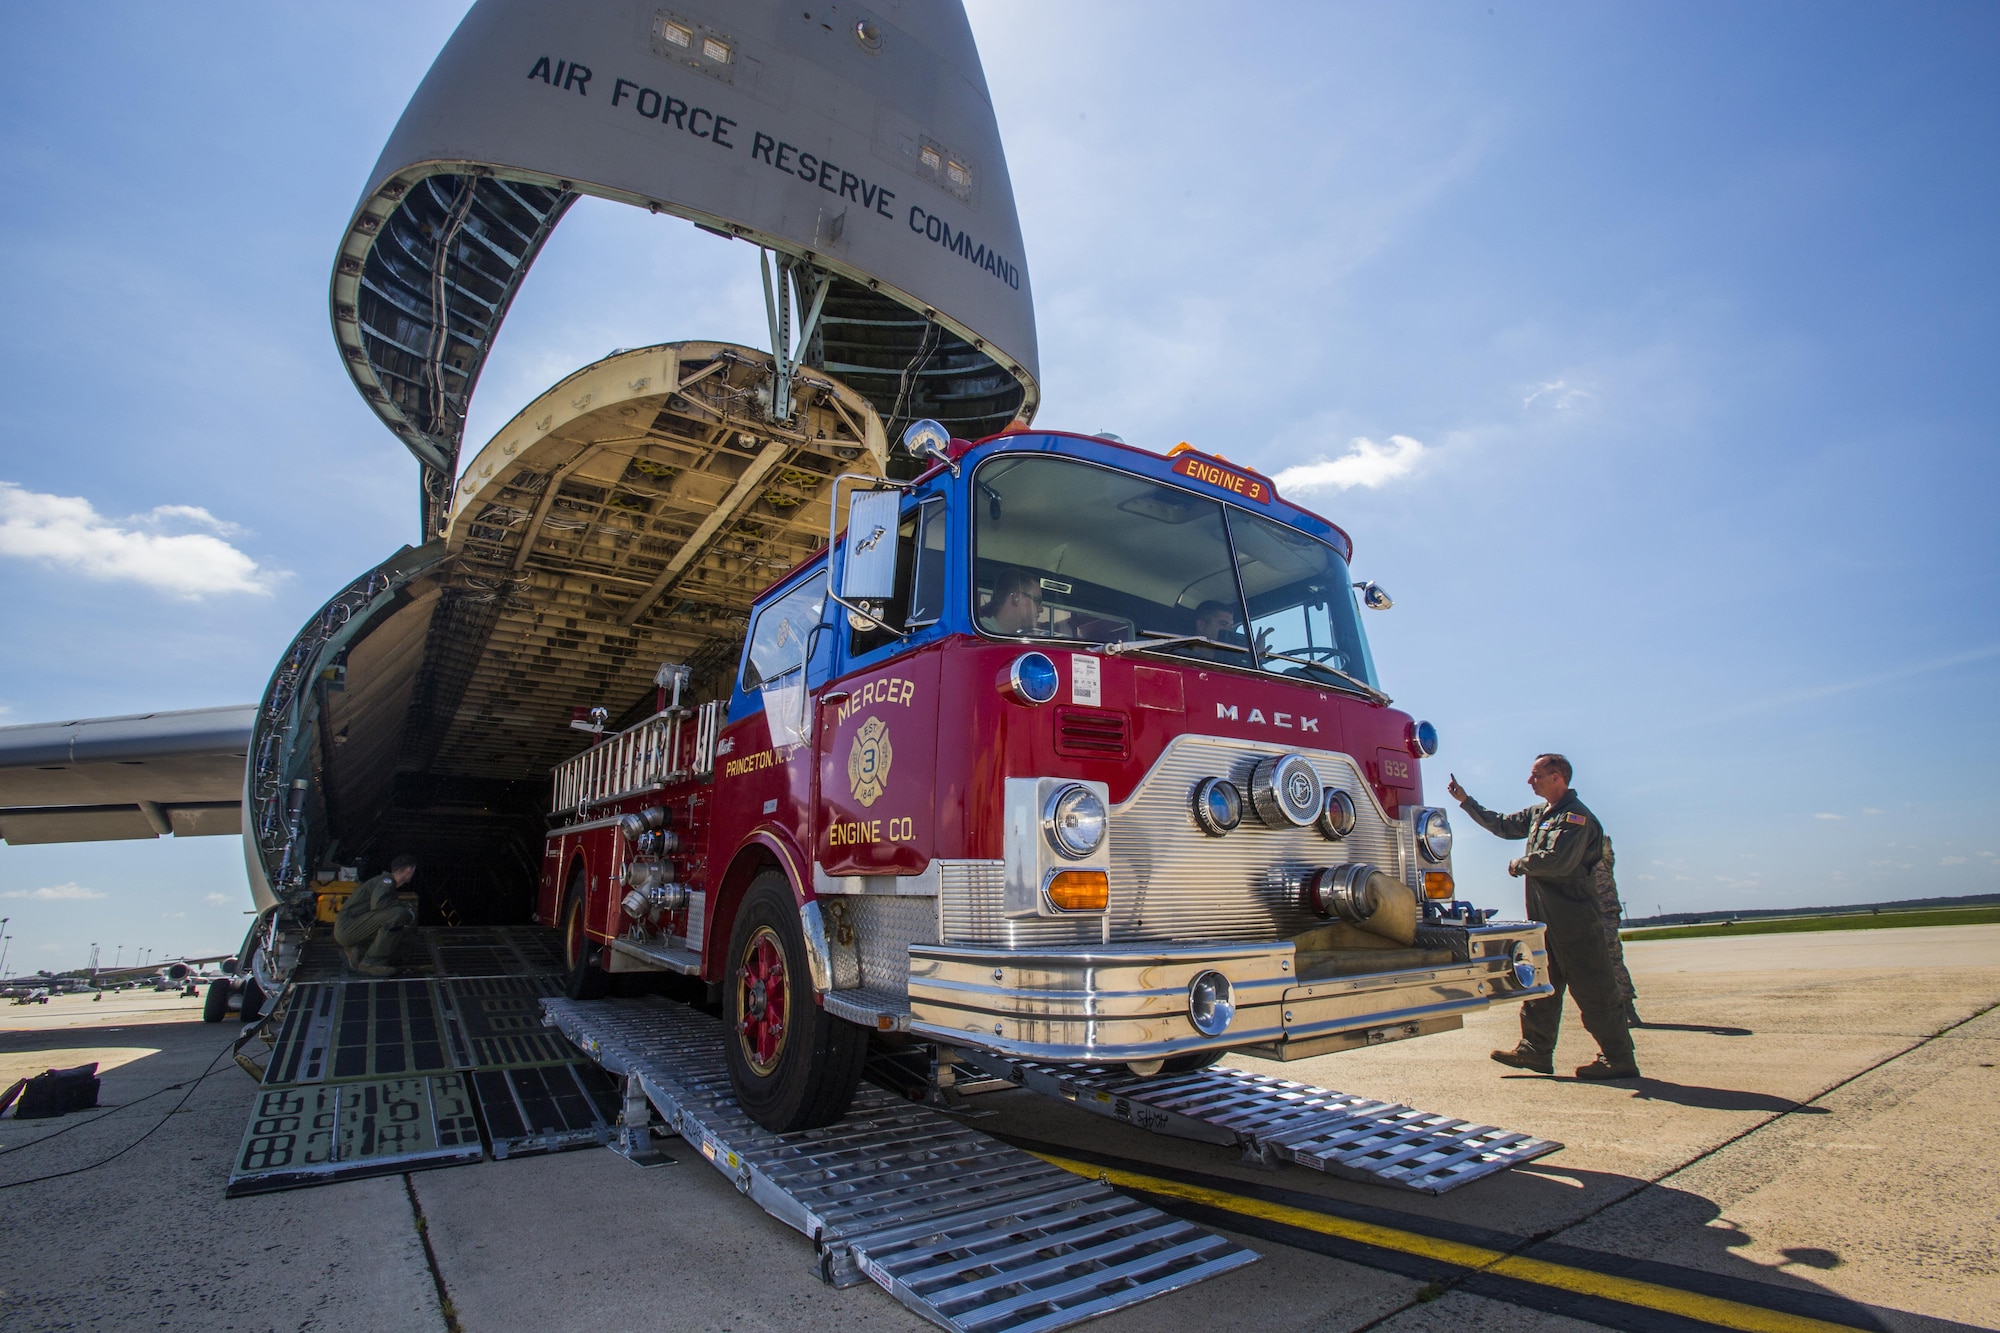 Loadmasters with the 439th Airlift Wing, load a 1982 Mack fire truck onto a C-5B Galaxy at Joint Base McGuire-Dix-Lakehurst New Jersey, on Aug. 12, 2016. The truck will be flown to Managua, Nicaragua. Master Sgt. Jorge A. Narvaez, a New Jersey Air National Guardsman with the 108th Security Forces Squadron, was instrumental in getting the truck donated to a group of volunteer firefighters in Managua. The 439th AW is located at Westover Air Reserve Base, Mass.